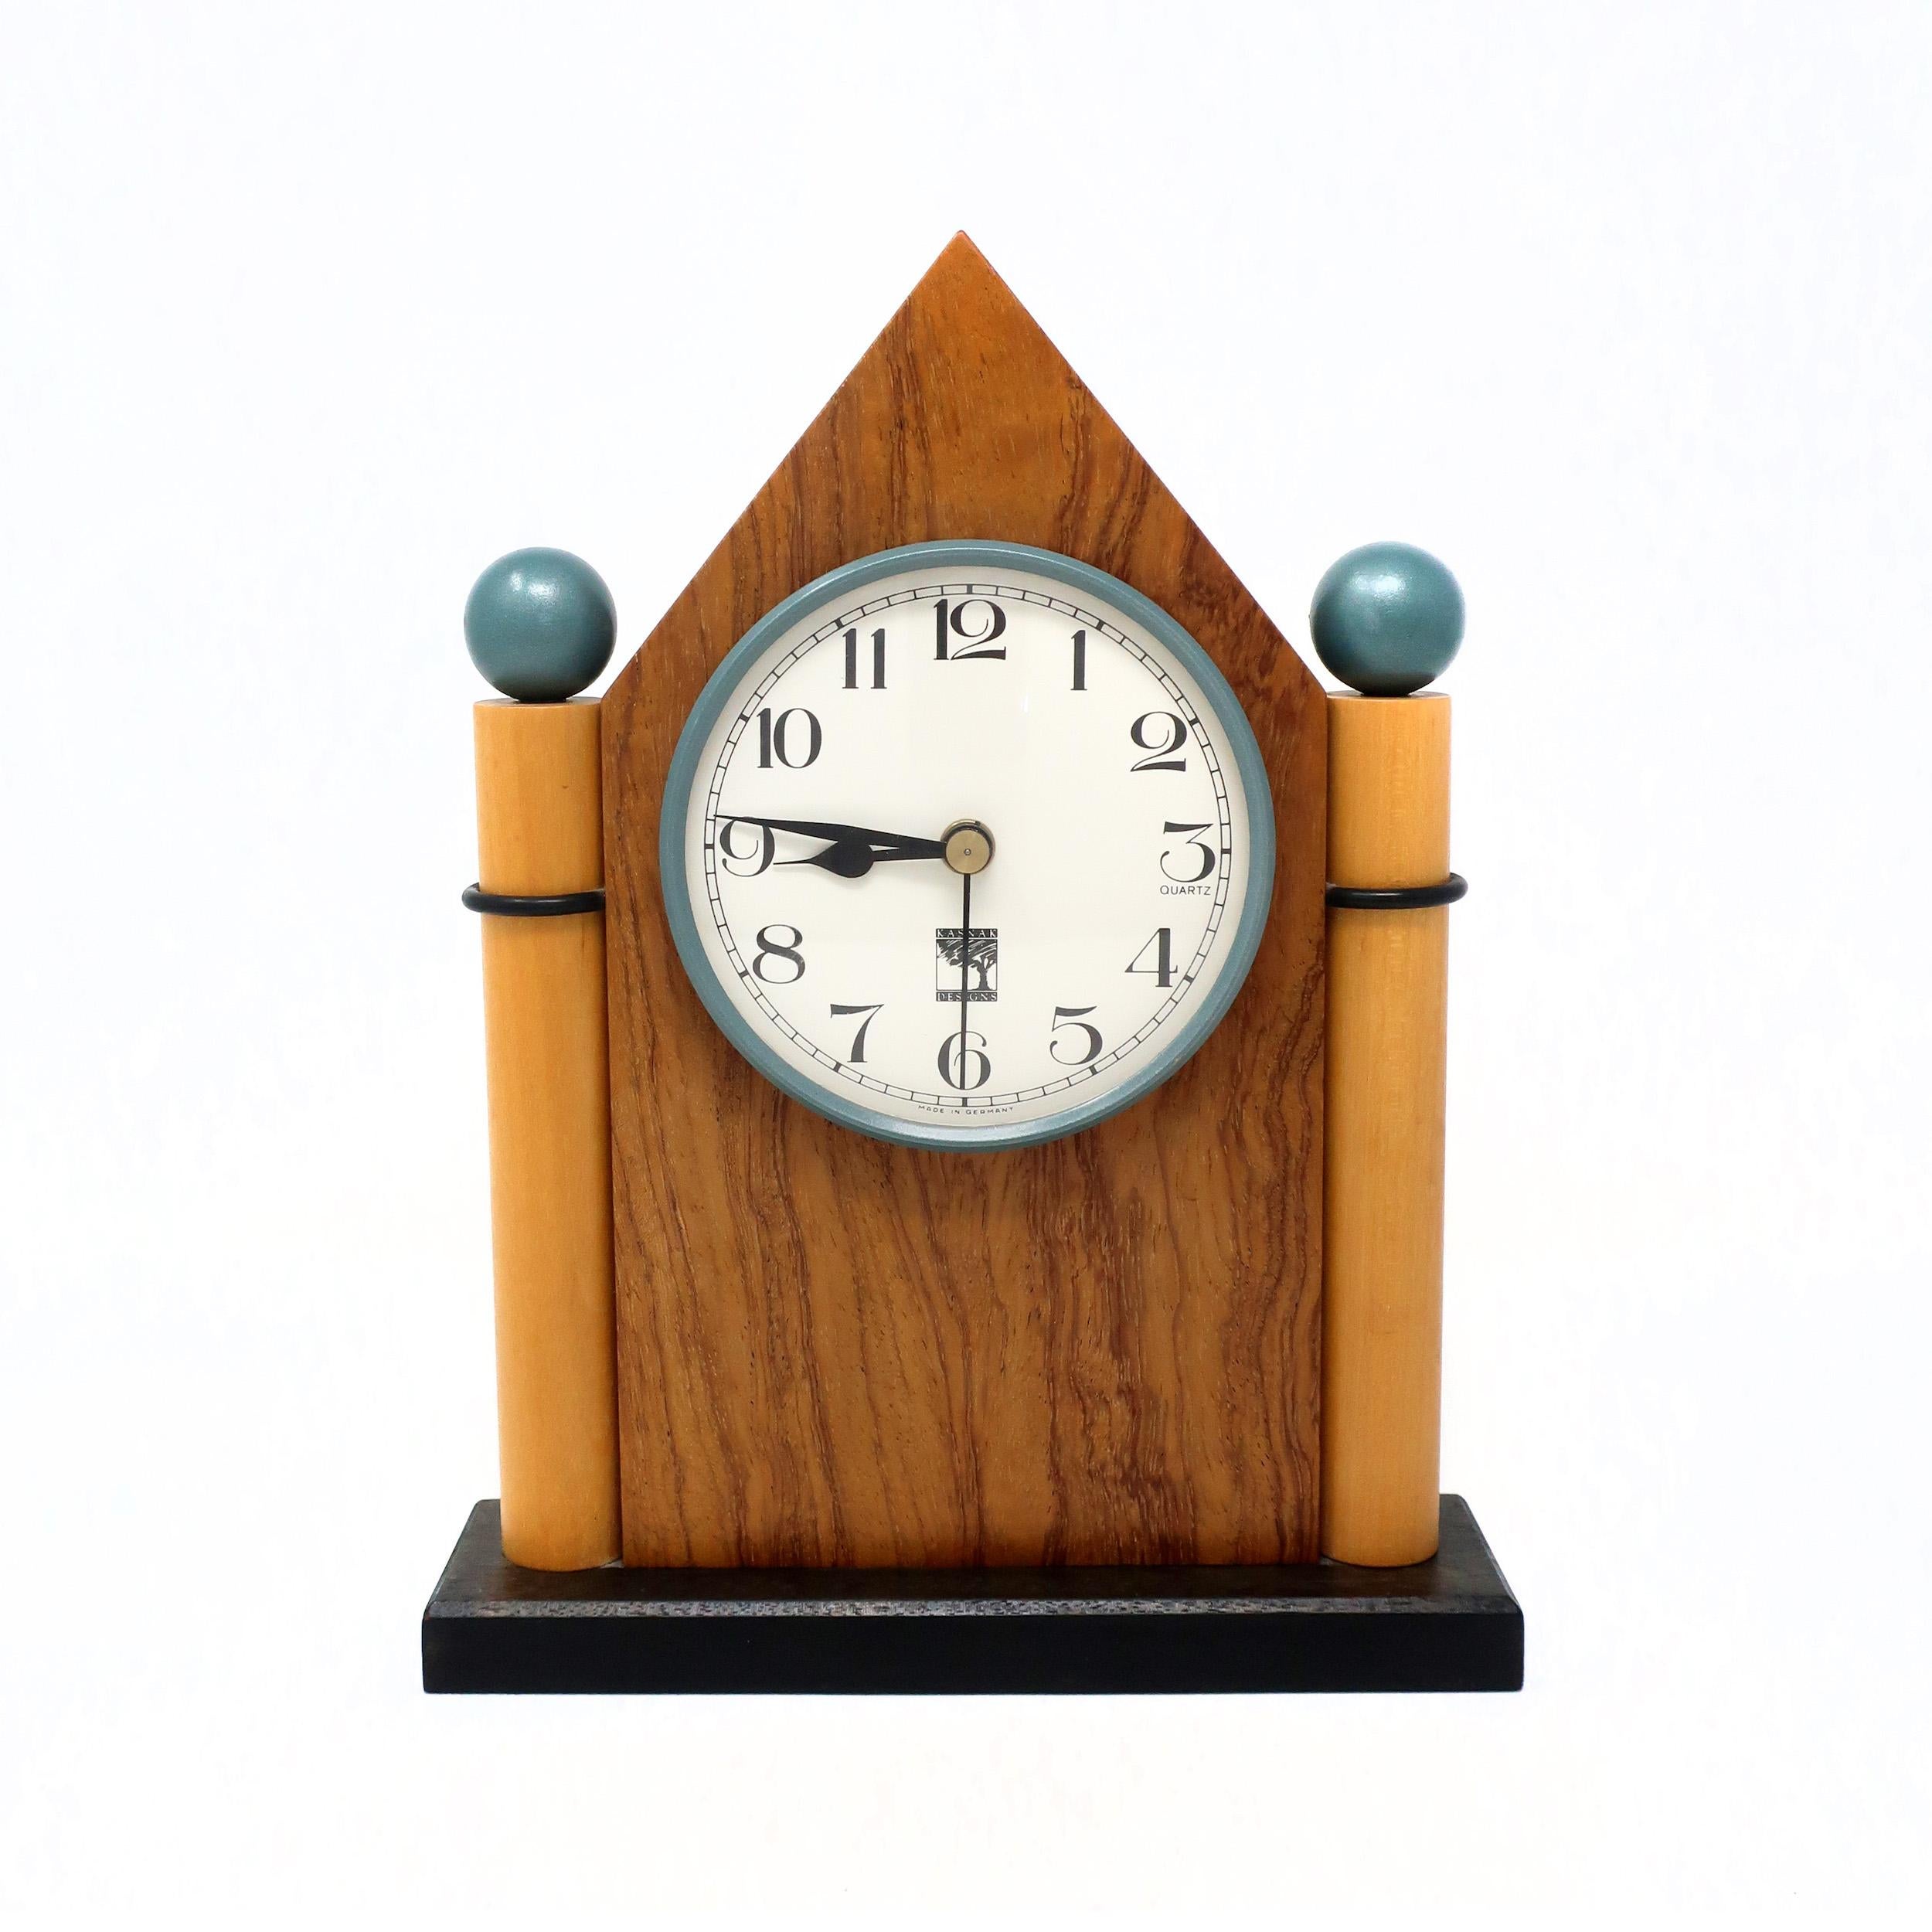 A gorgeously handcrafted wood mantel or desk clock made by in 1990 by Kasnak Designs of Indianapolis, Indiana. A perfect mix of 1980's Memphis Milano-inspired design and Mission/Art & Crafts expert woodworking. Dark stained wood base with black